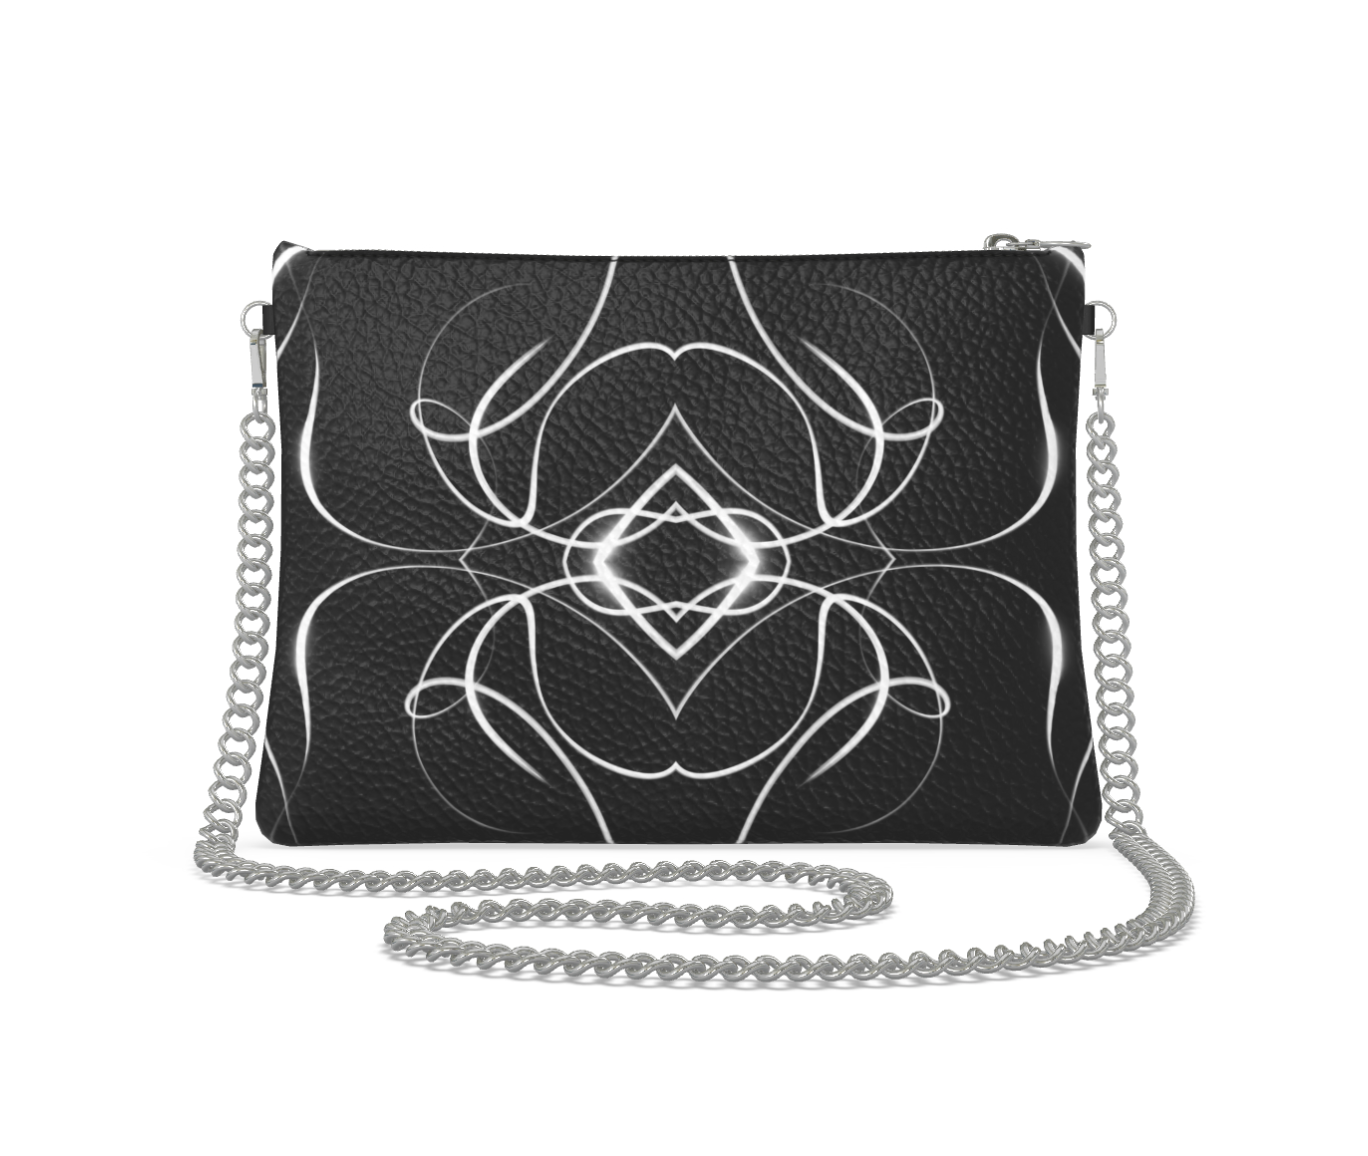 UNTITLED x Indira Cesarine "Lumière" Series Black and White Leather Kaleidoscopic Crossbody Bag with Silver Chain - Limited Edition